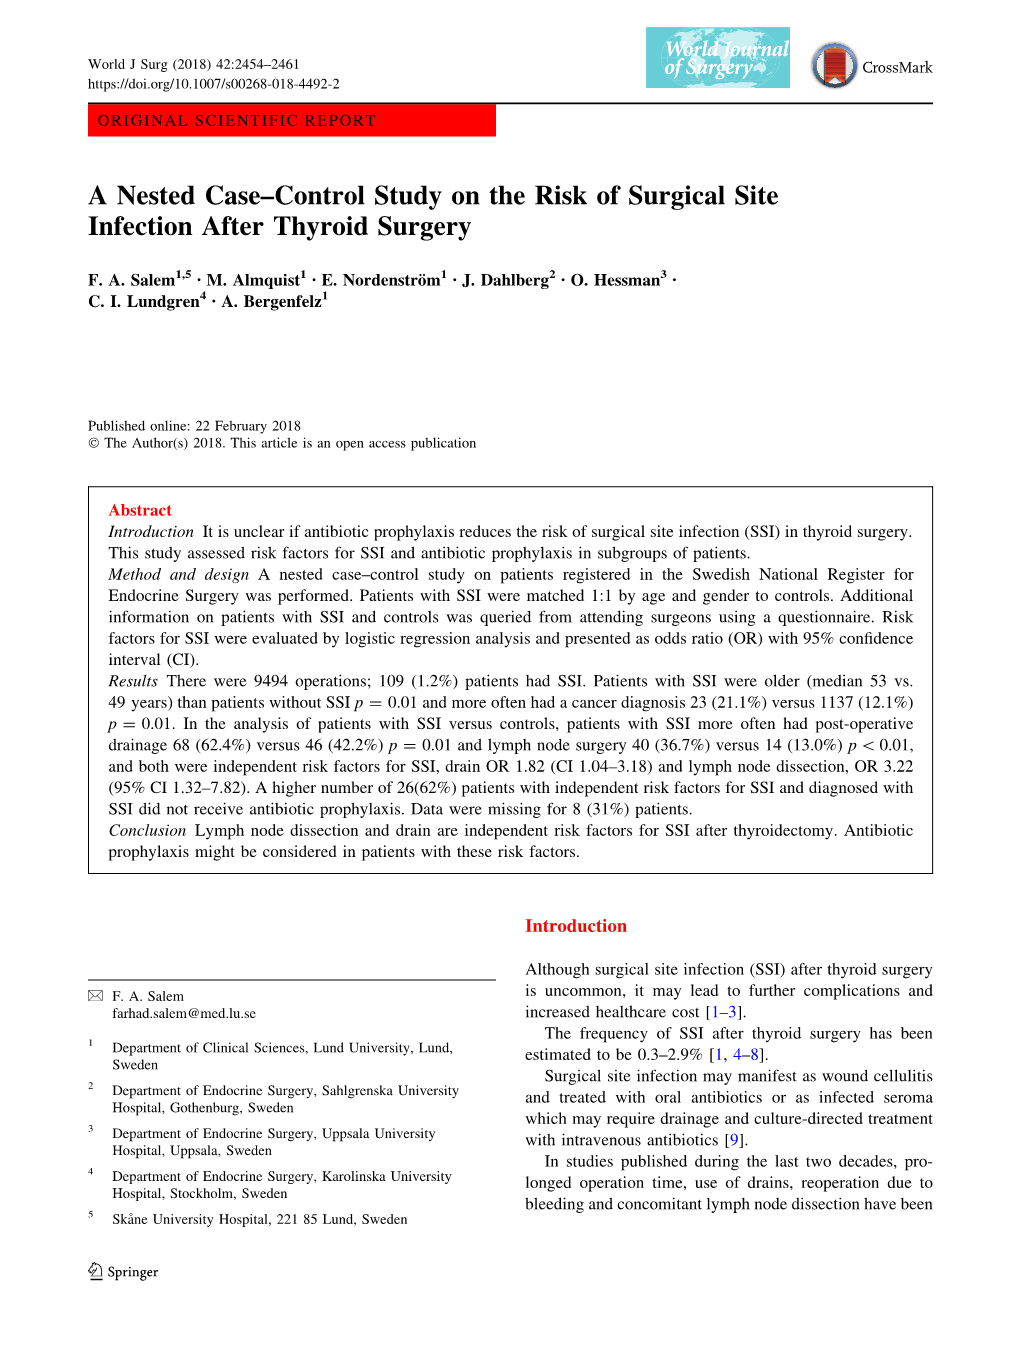 A Nested Case–Control Study on the Risk of Surgical Site Infection After Thyroid Surgery